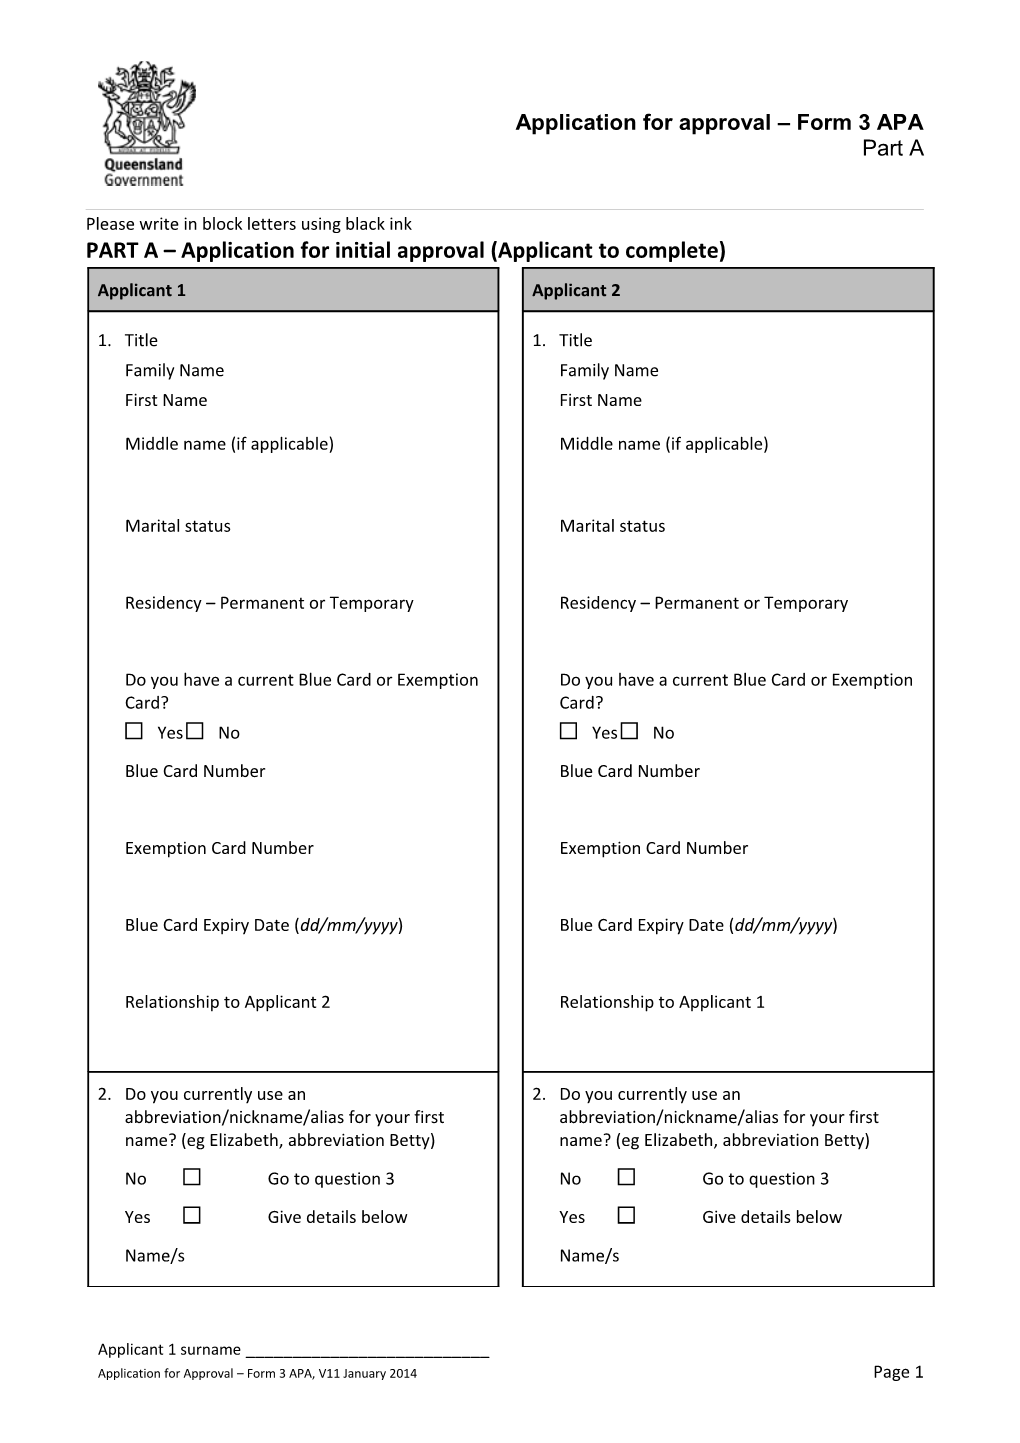 Application for Approval - Form 3 APA